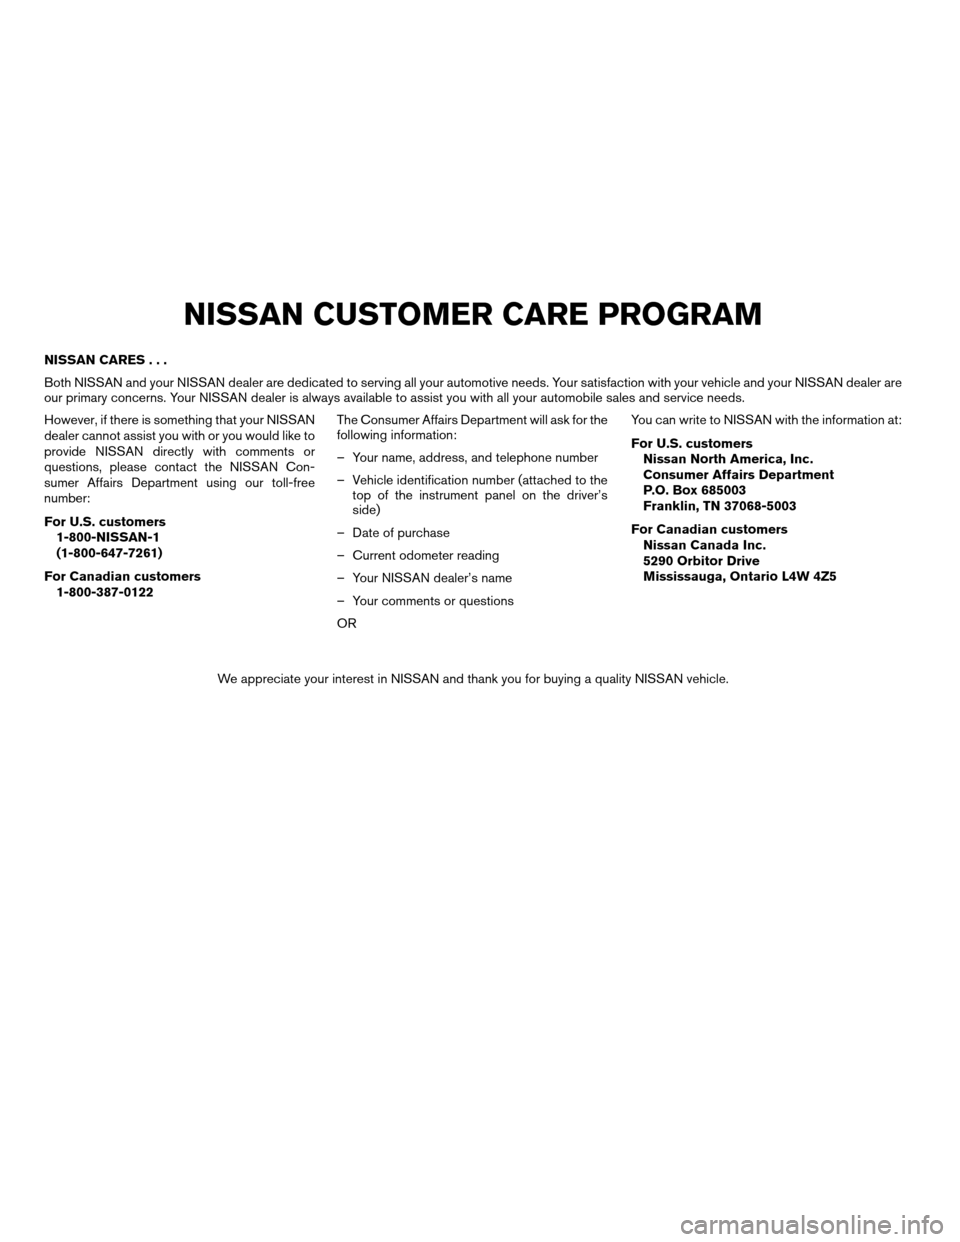 NISSAN ALTIMA COUPE 2009 D32 / 4.G Owners Manual NISSAN CARES...
Both NISSAN and your NISSAN dealer are dedicated to serving all your automotive needs. Your satisfaction with your vehicle and your NISSAN dealer are
our primary concerns. Your NISSAN 